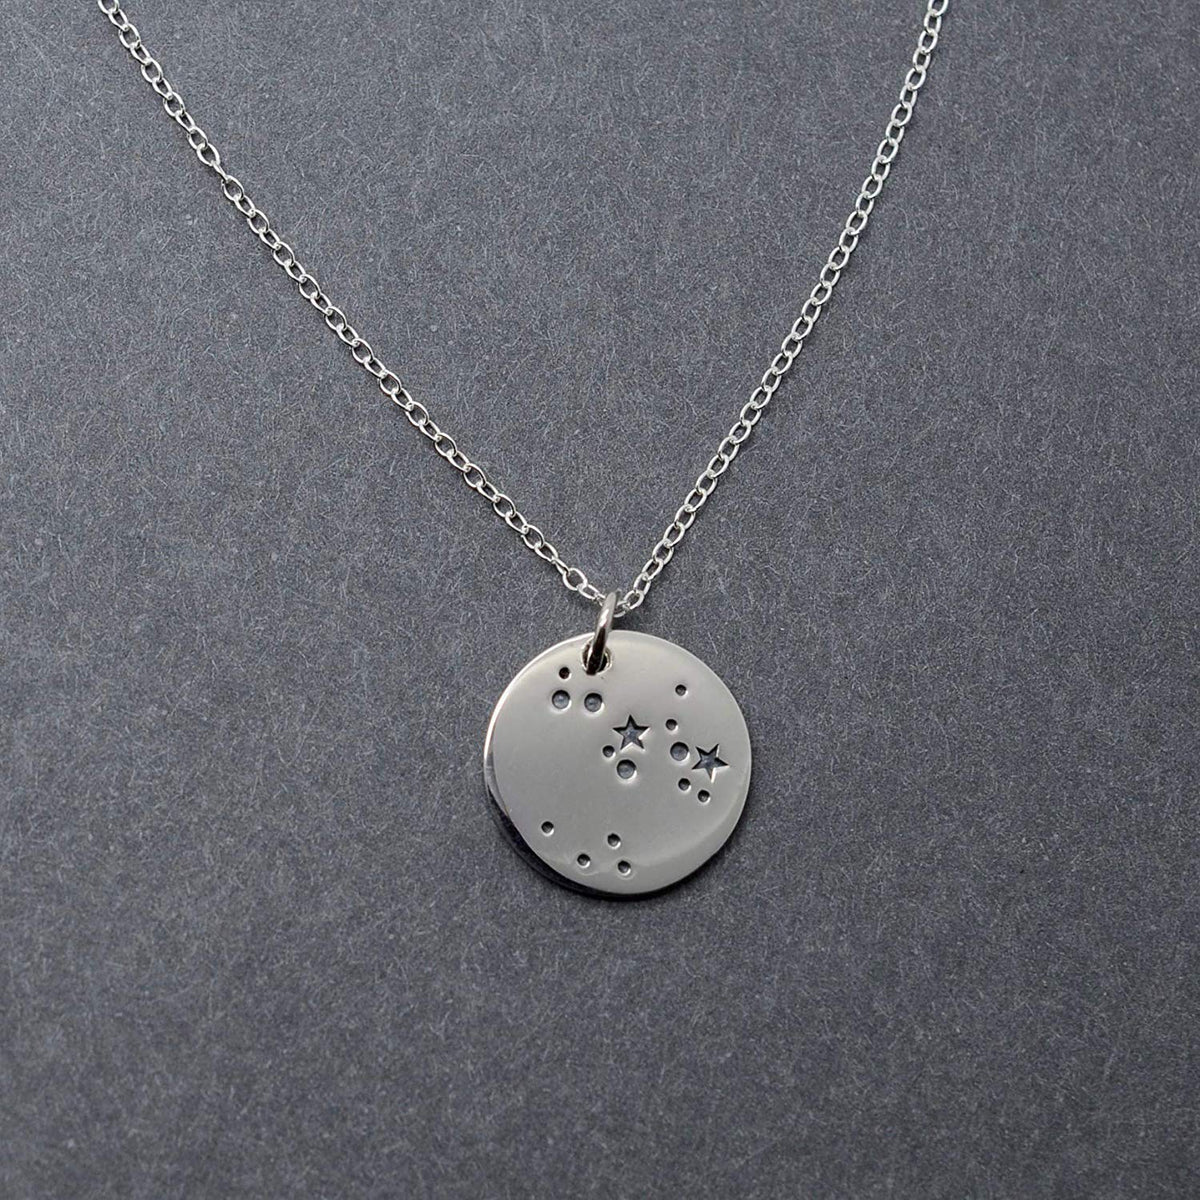 Sagittarius Zodiac Sign Sterling Silver Constellation Necklace - Love It Personalized